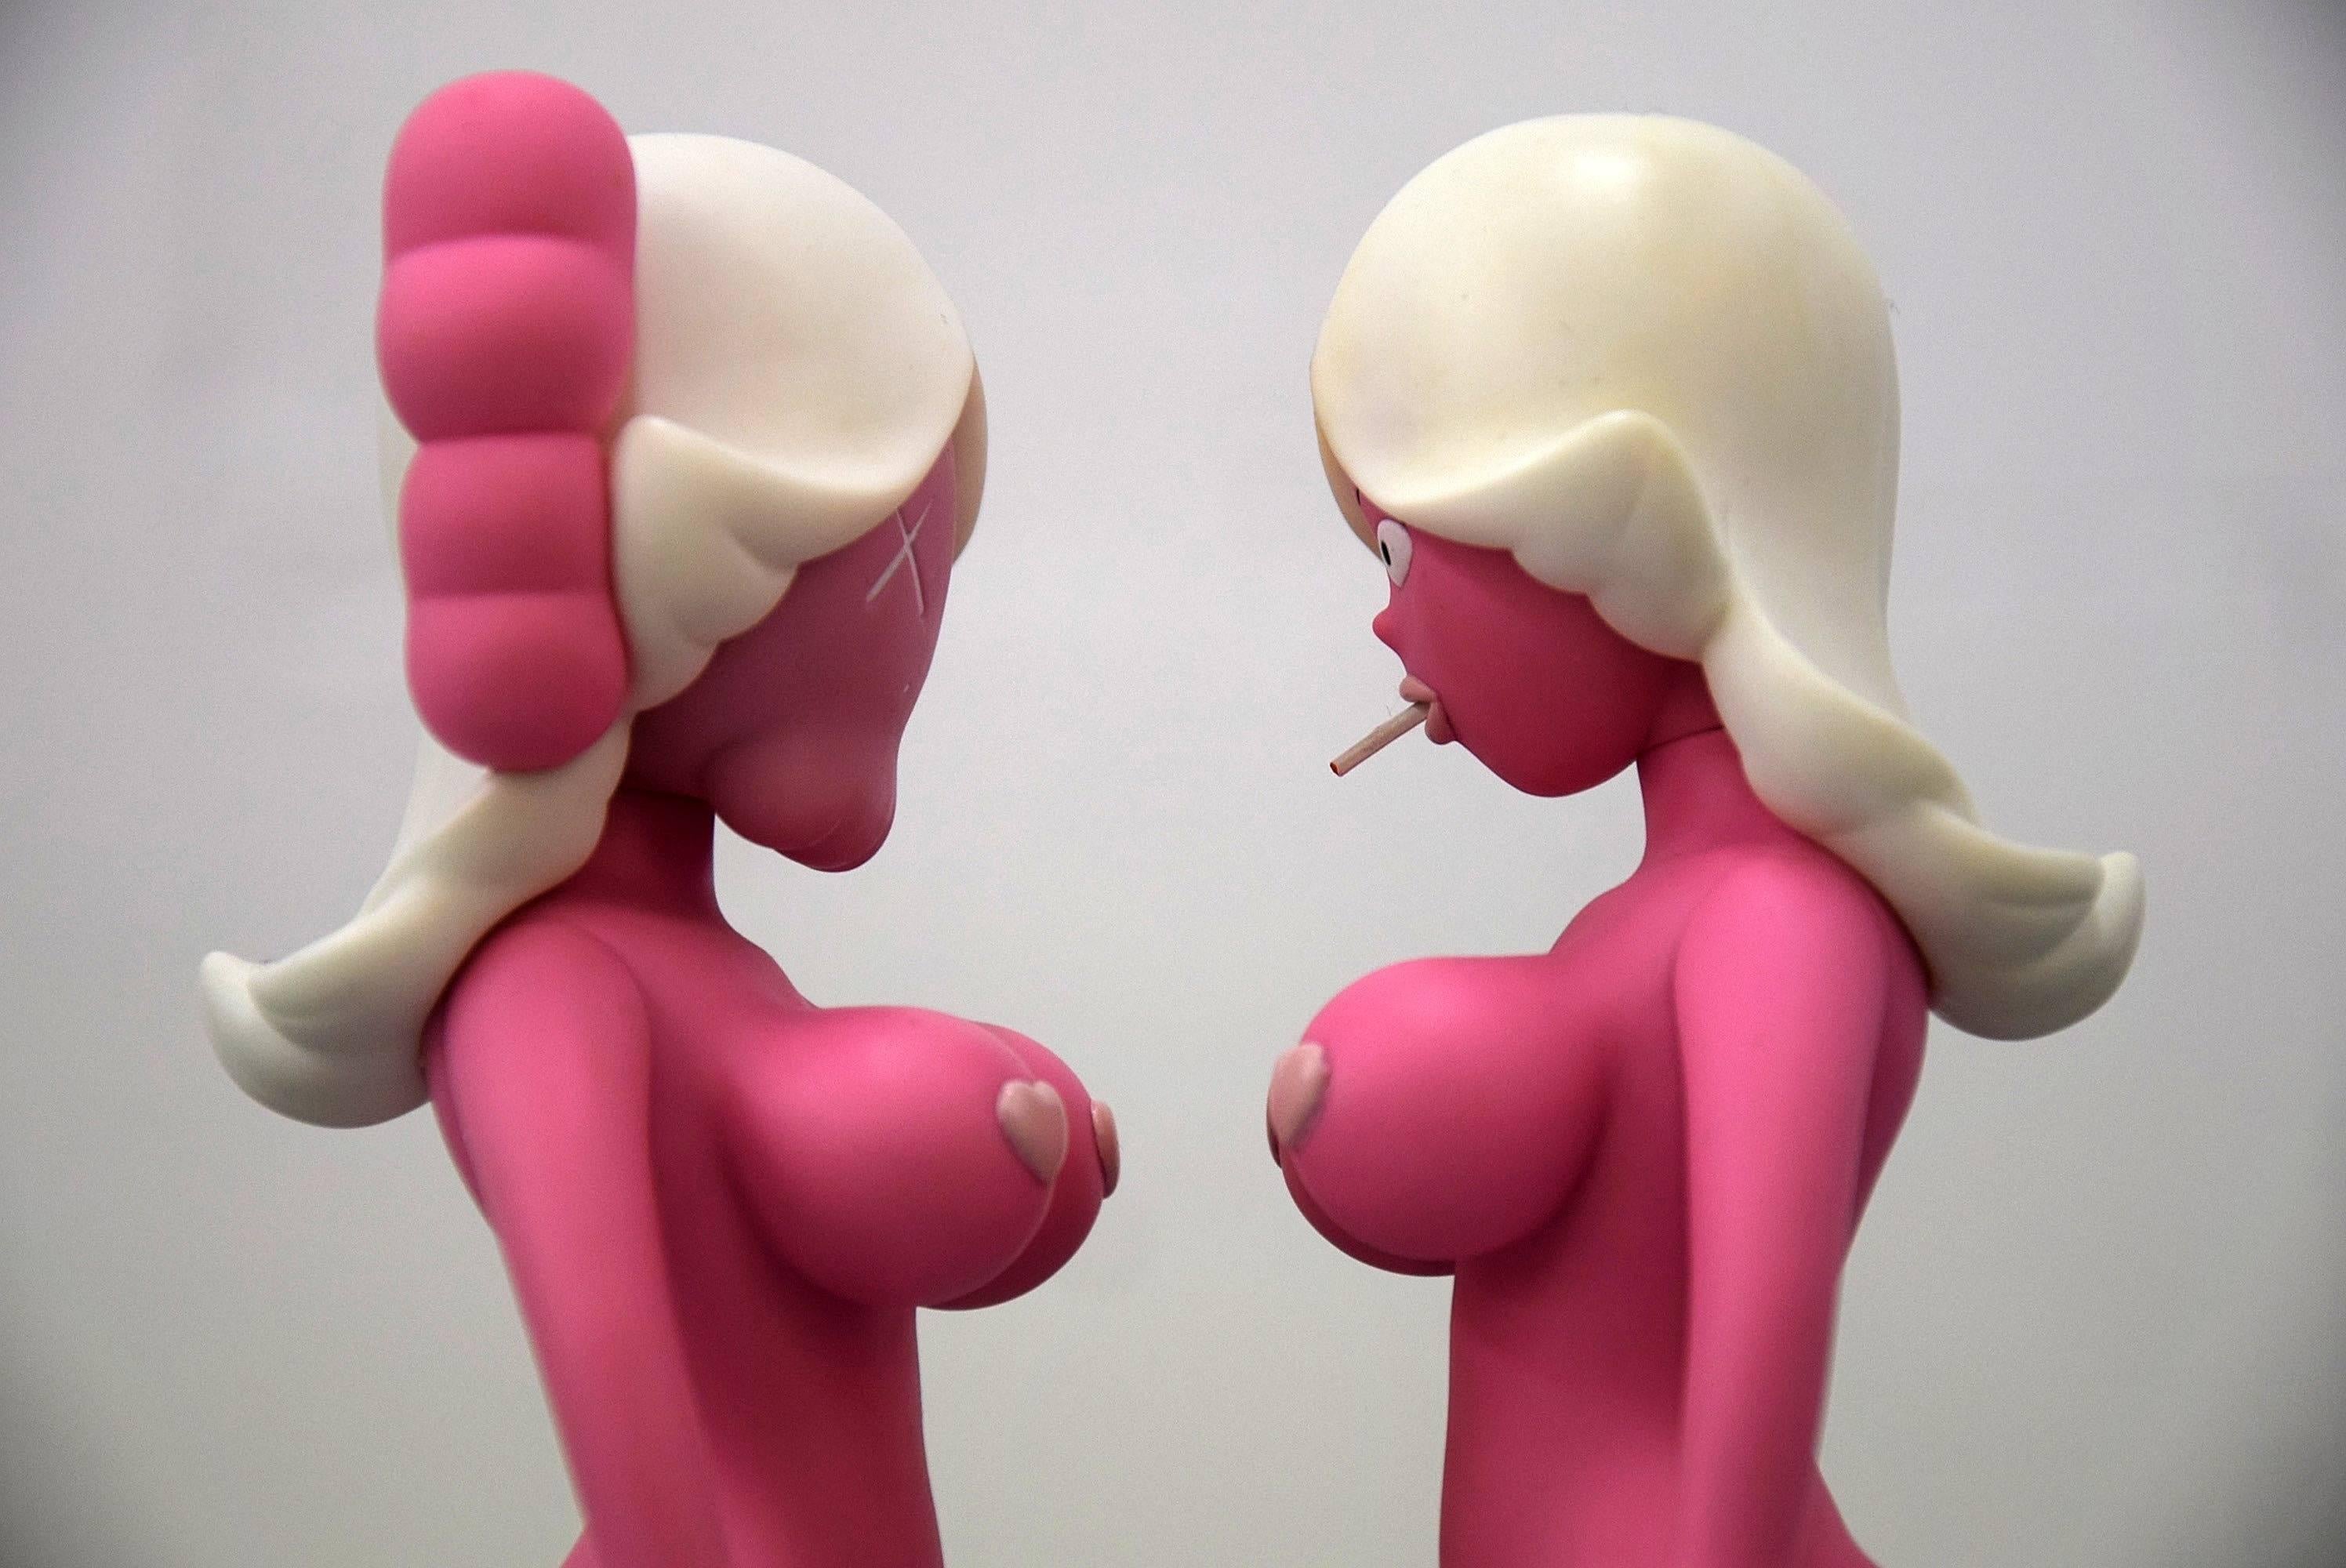 Contemporary Twins by Kaws and Todd James, 2004